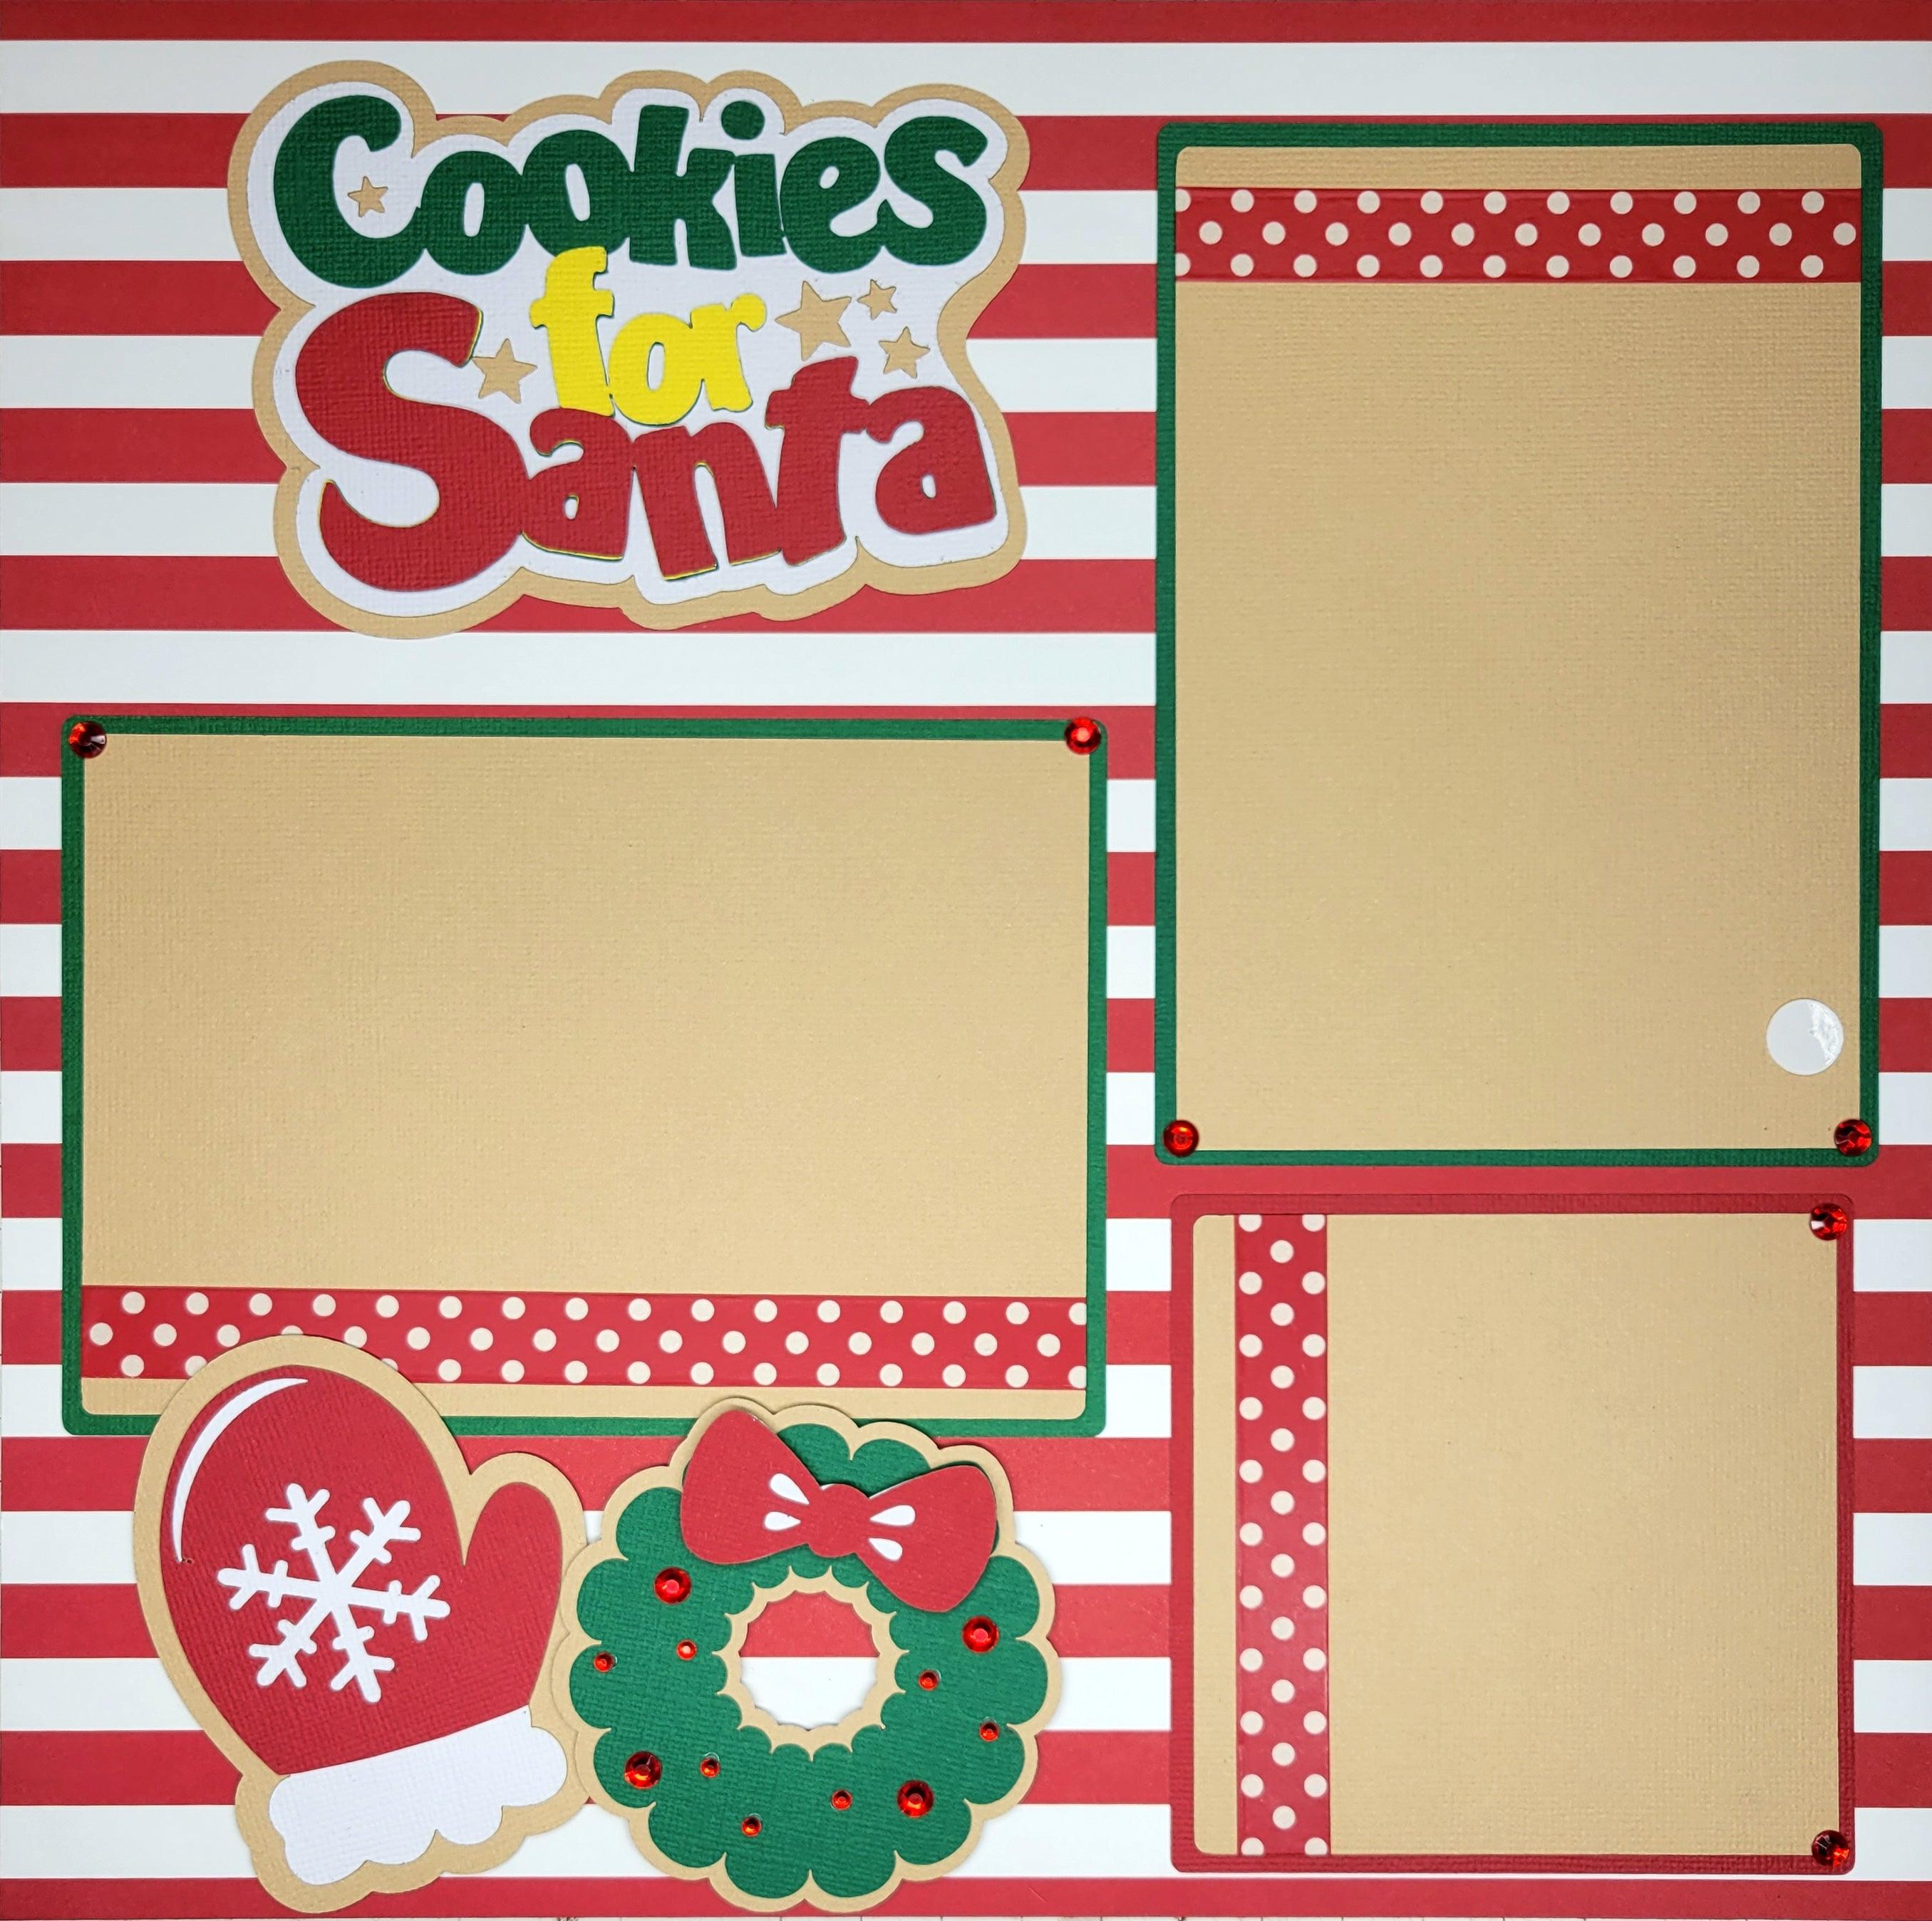 Cookies for Santa Pre-Made Embellished Two-Page 12 x 12 Scrapbook Premade by SSC Designs - Scrapbook Supply Companies